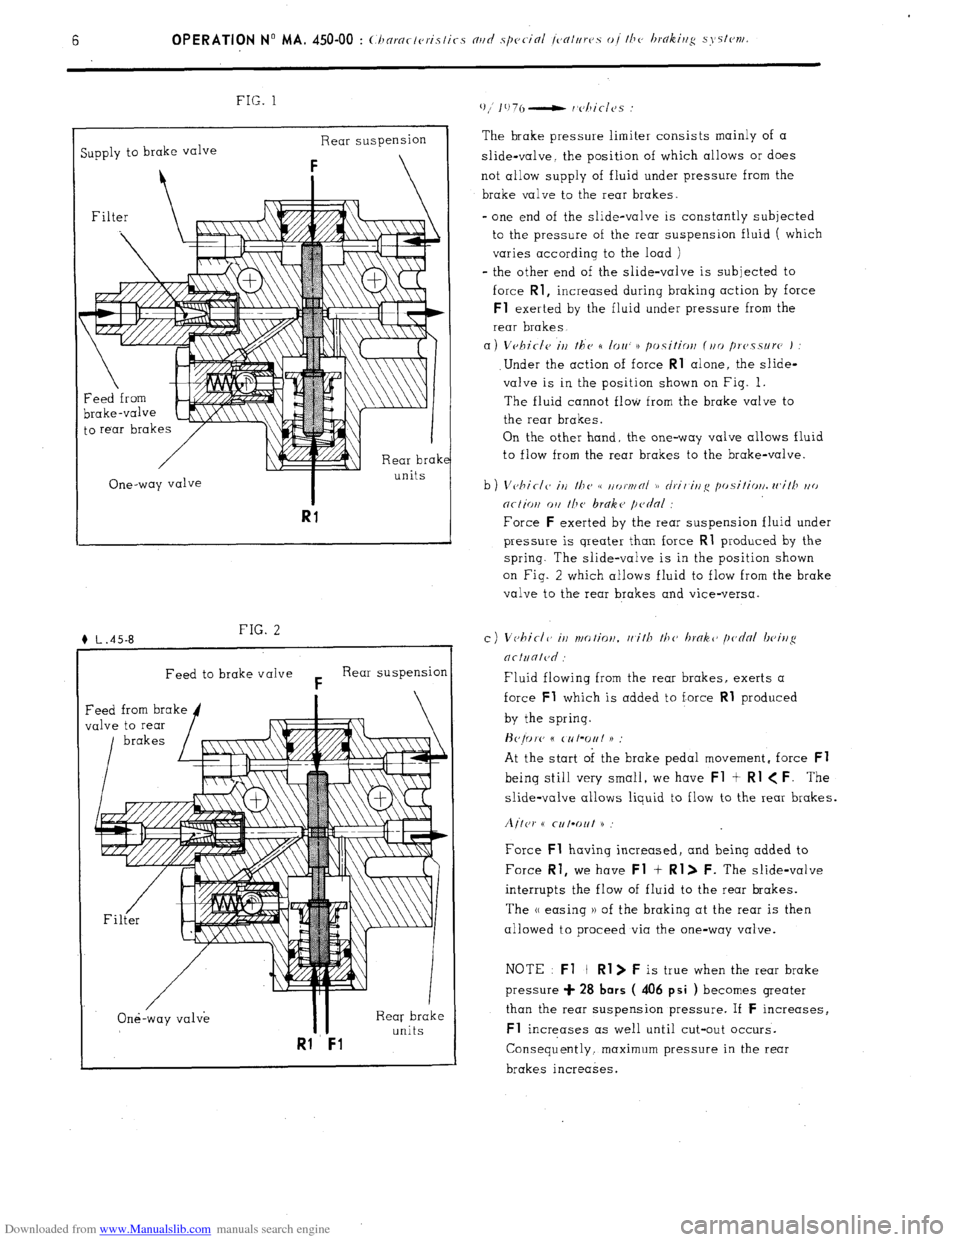 Citroen CX 1982 1.G User Guide Downloaded from www.Manualslib.com manuals search engine FIG. 1 
Supply to brake valve Rear suspension 
i  
Filter 
\--Iii 
I 
Rear brak 
. . 
One-way valve 
I units 
Rl 
Feed to brake valve F Rear su